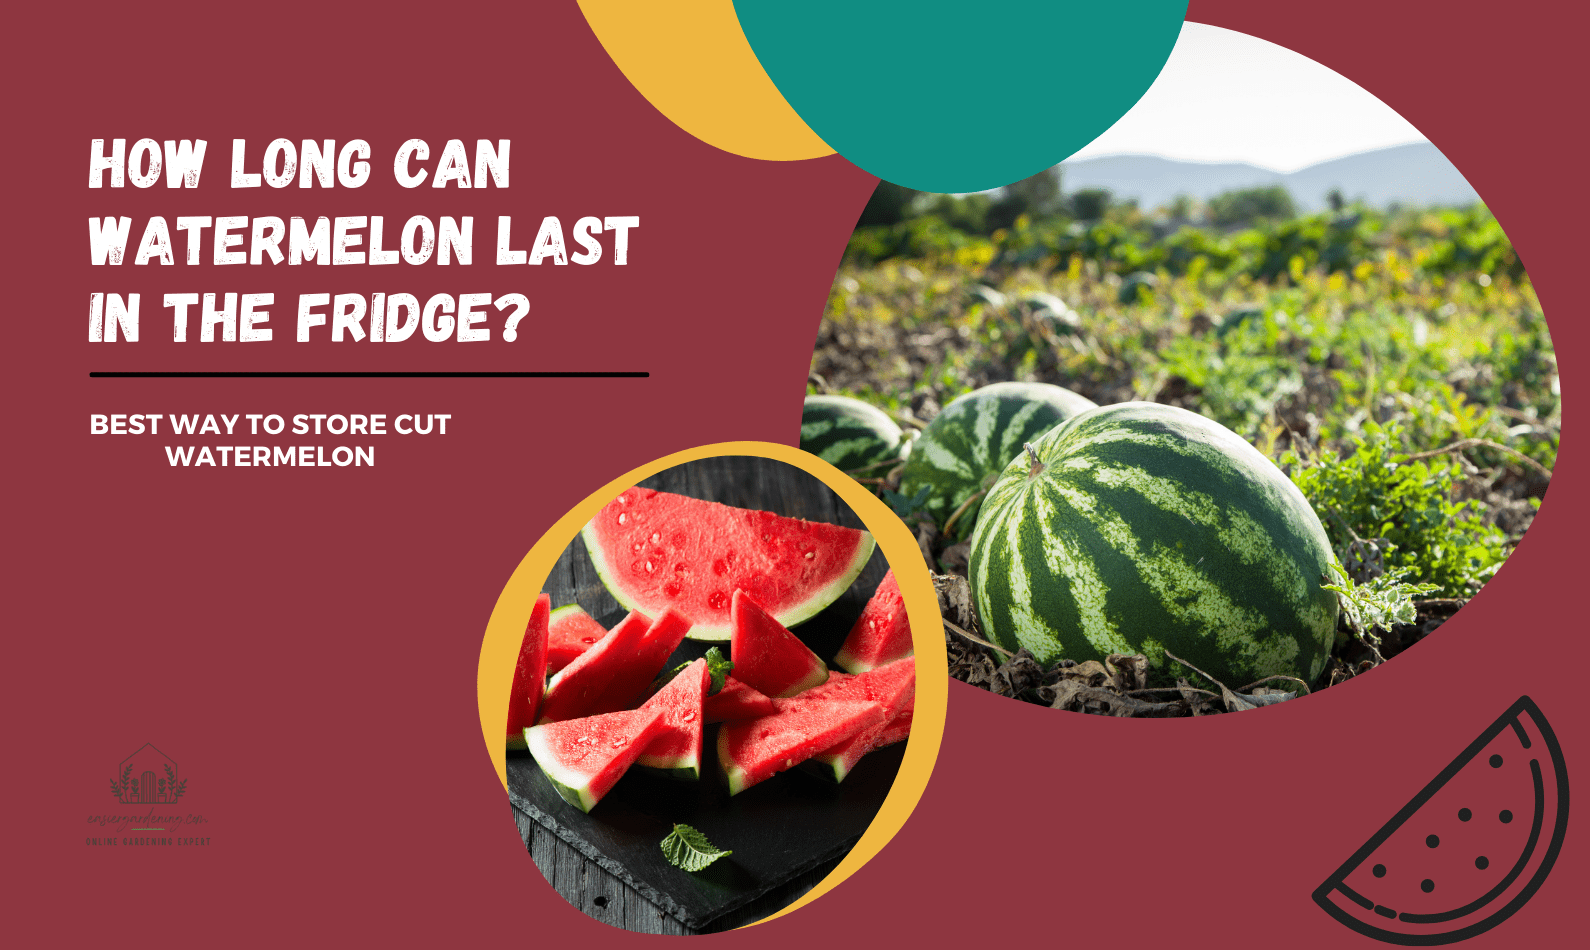 How Long can Watermelon Last in the Fridge?